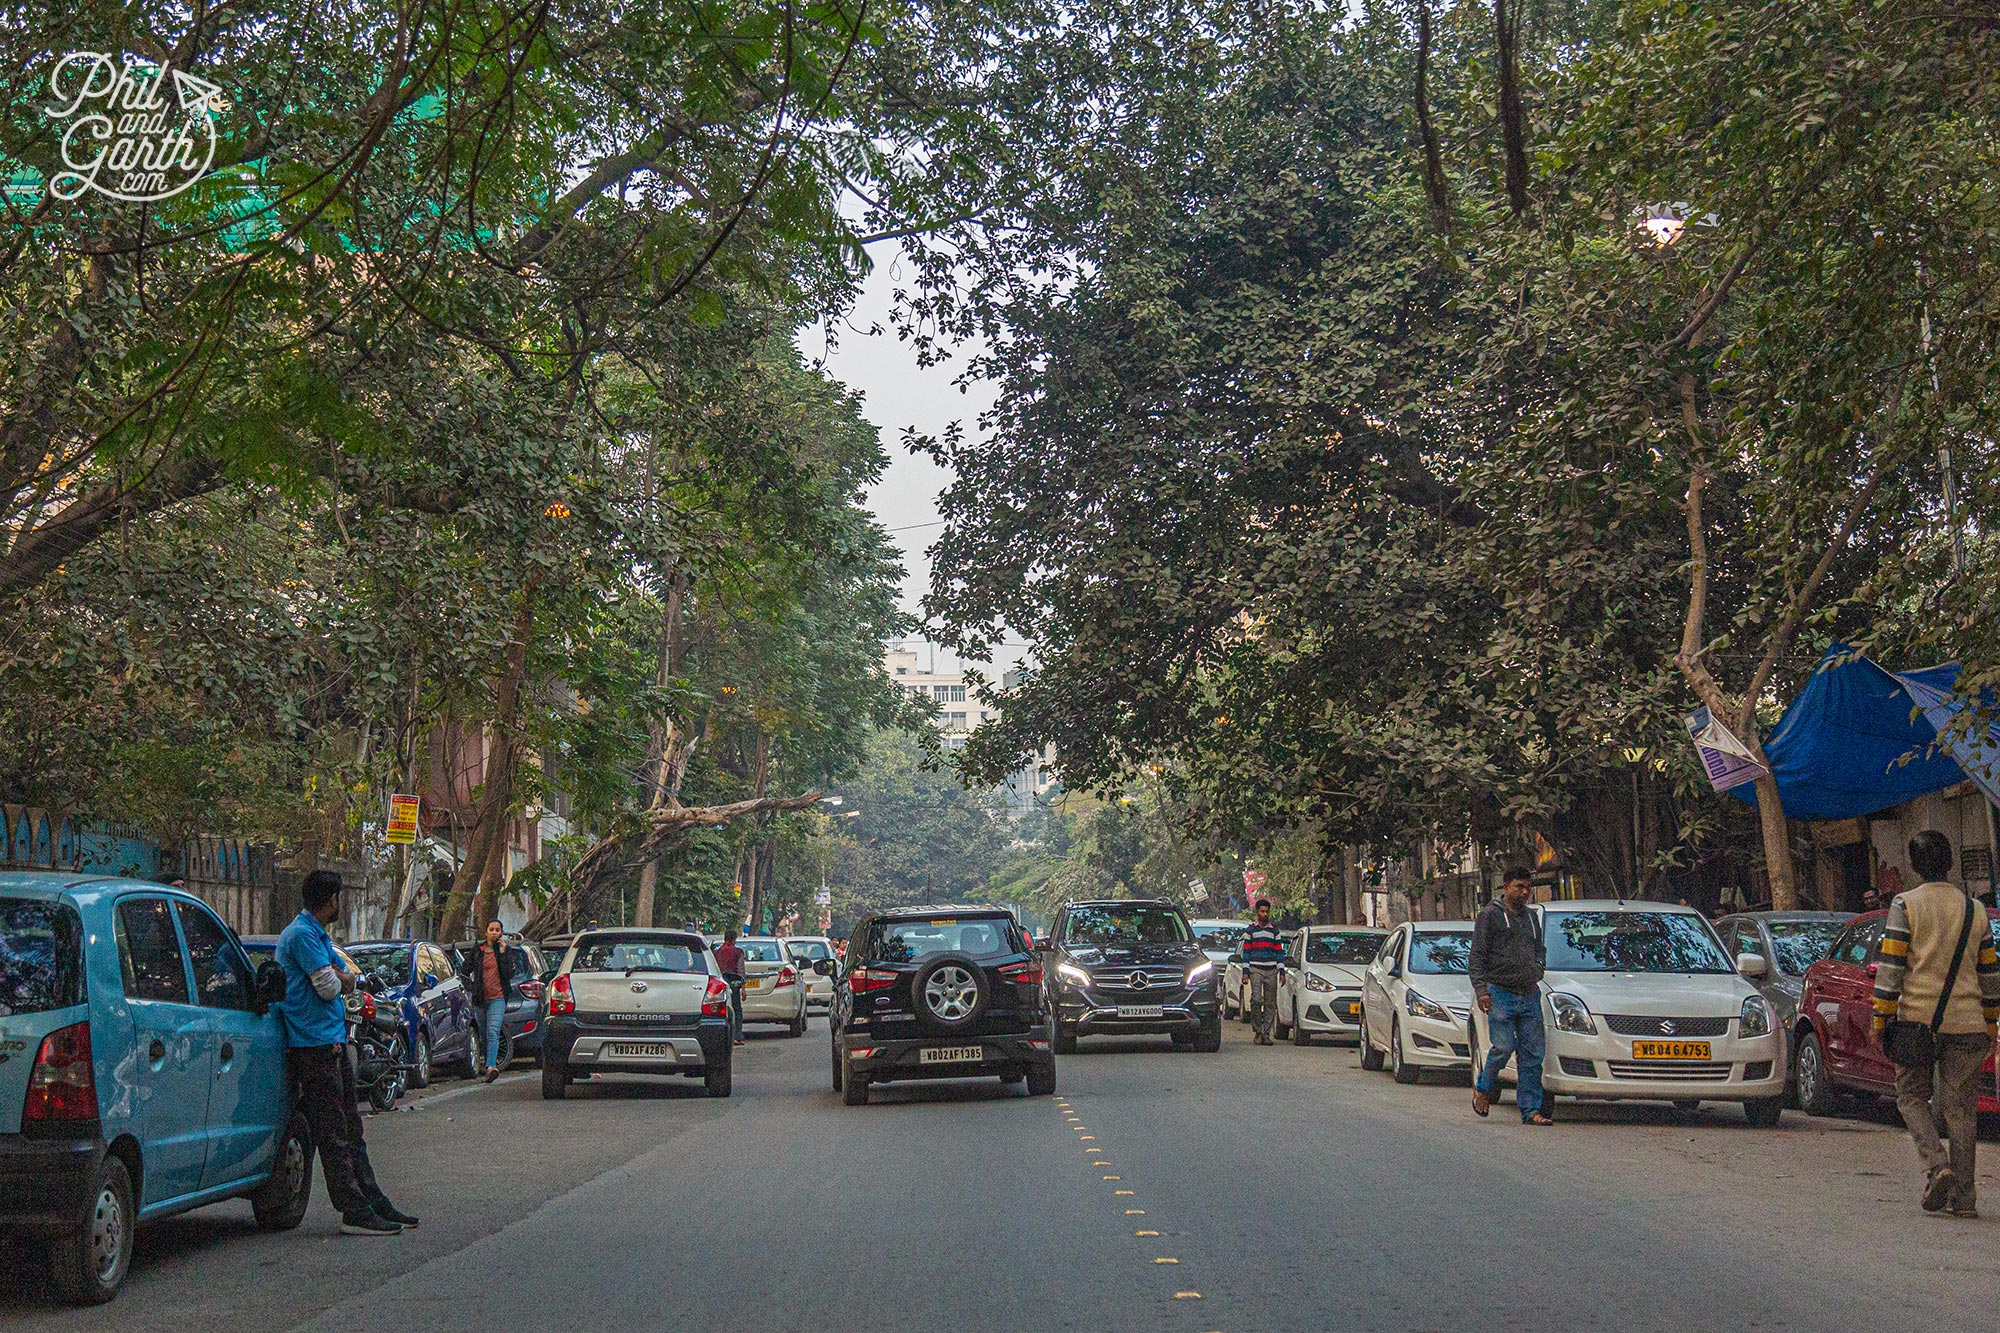 Many roads in Kolkata are tree lined and wide and feel a bit like Europe